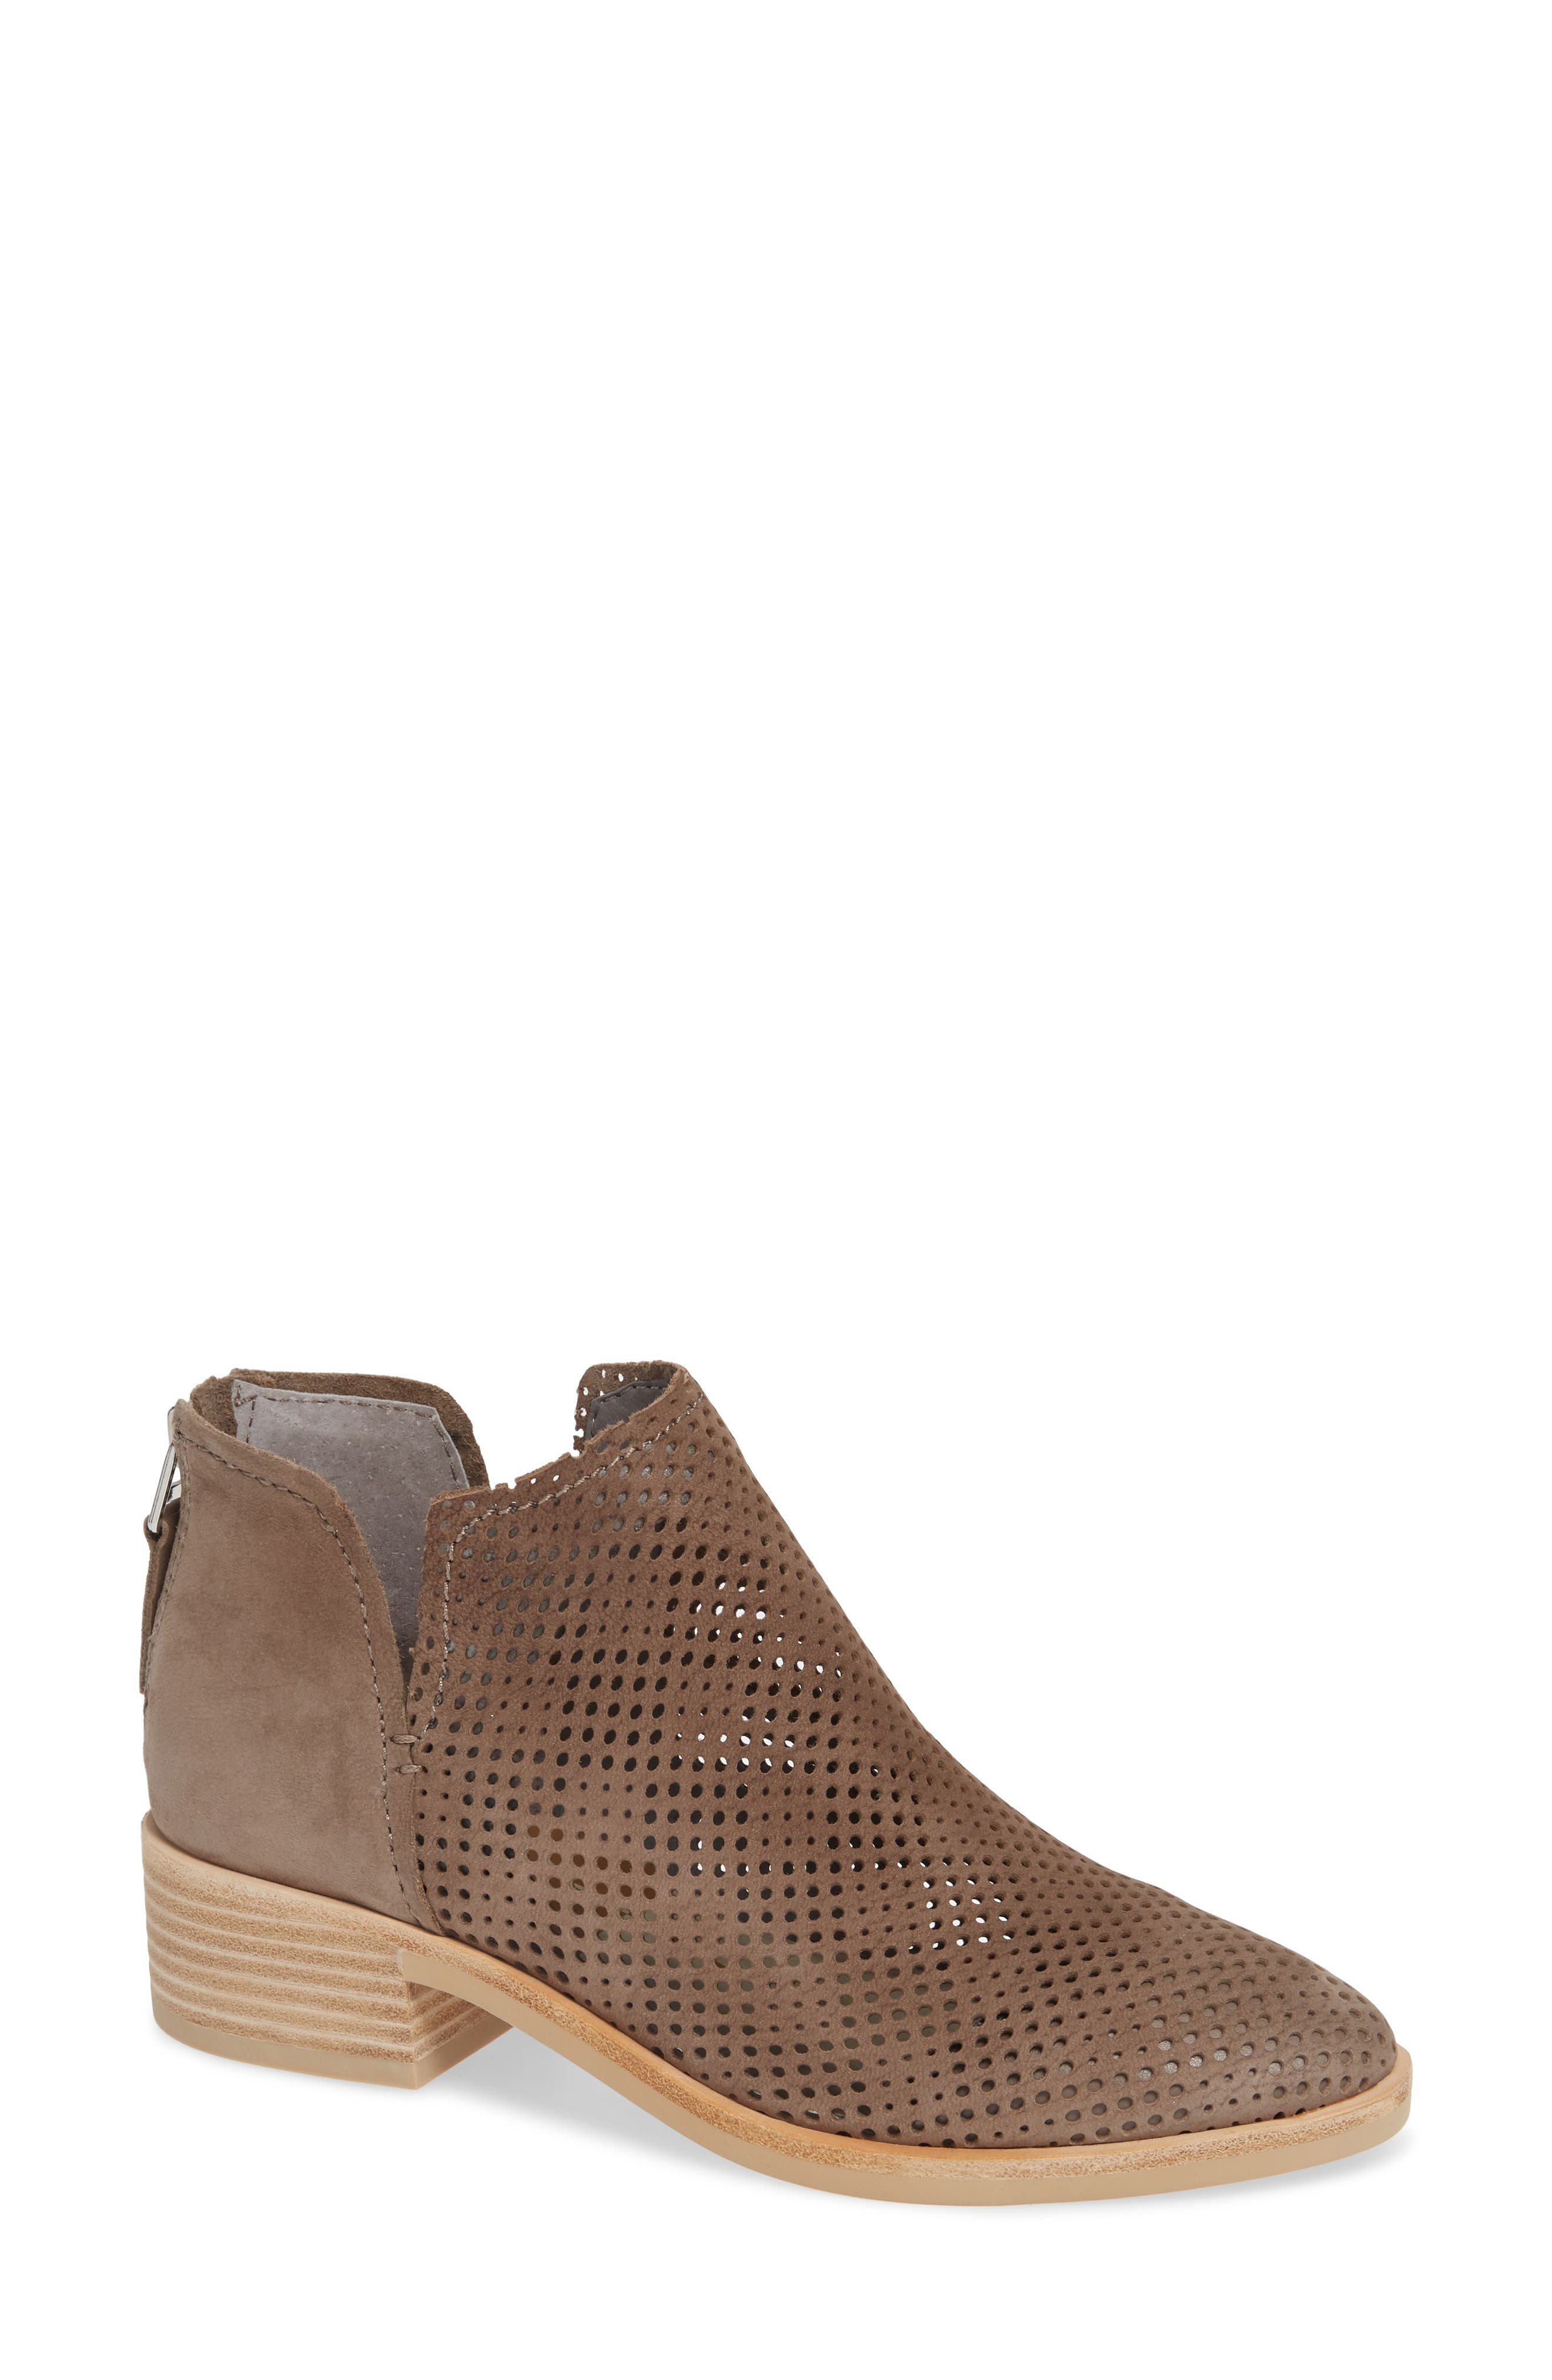 dolce vita perforated bootie